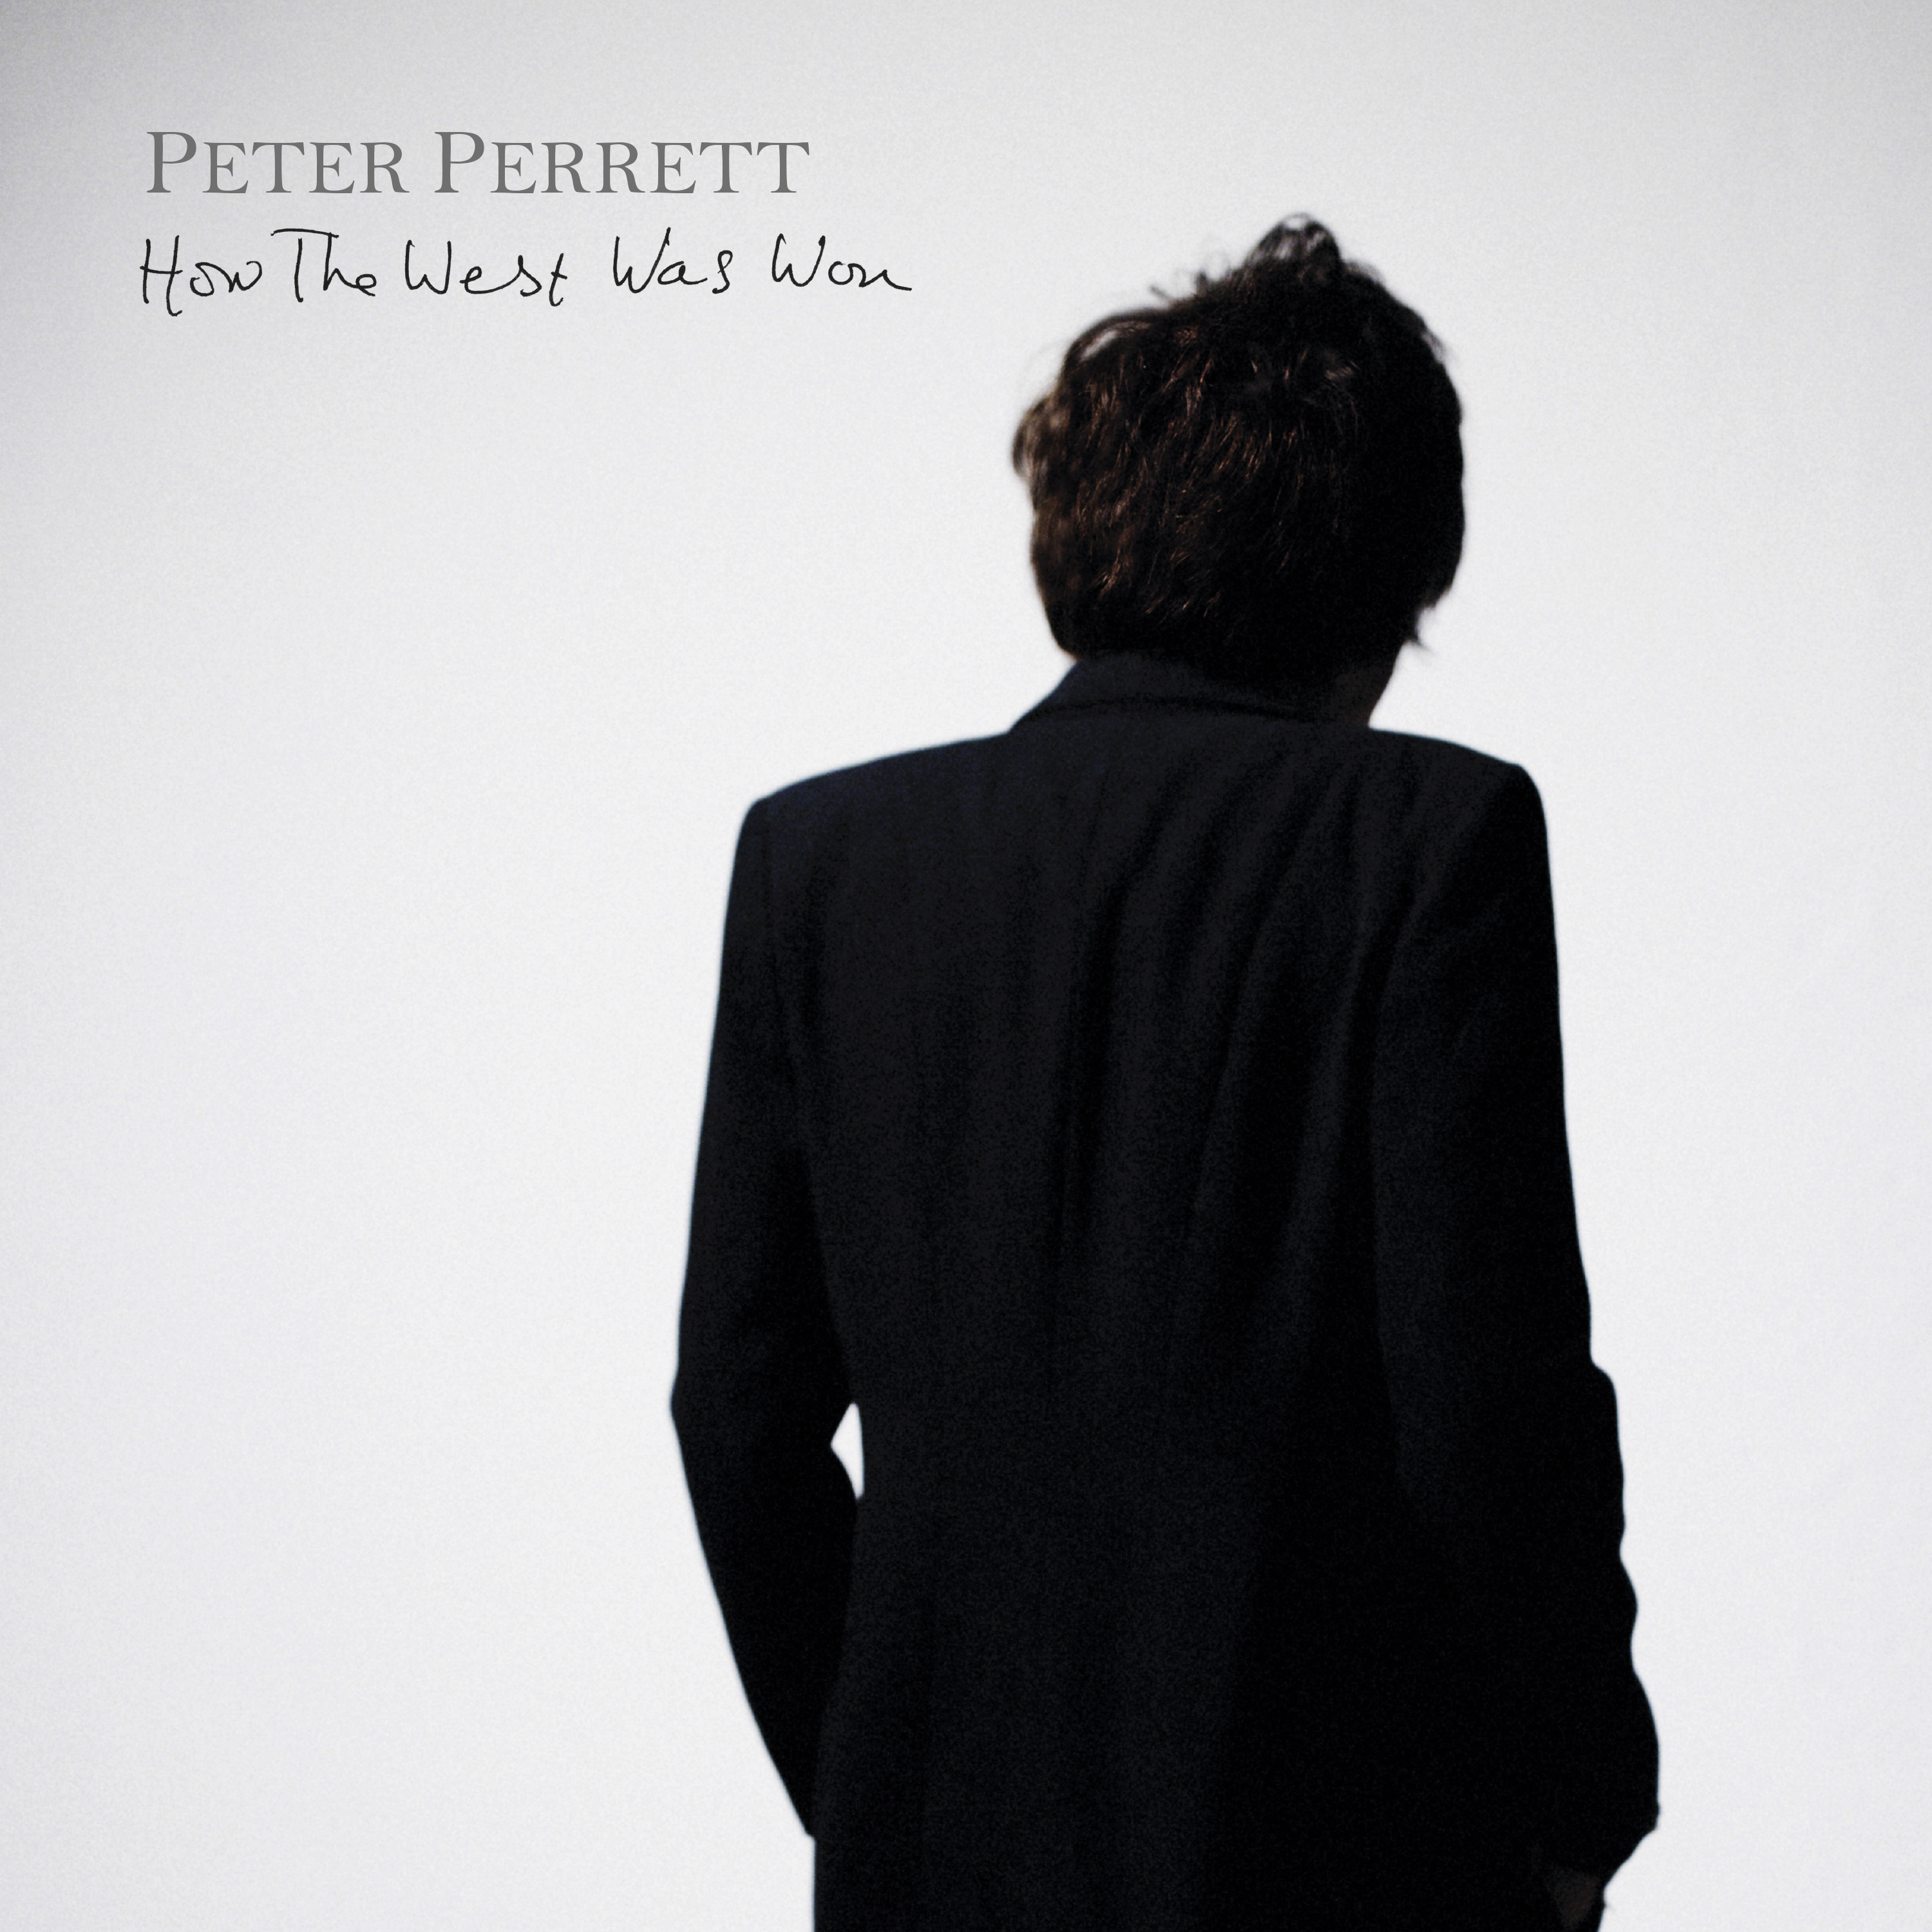 Image result for peter perrett how the west was won